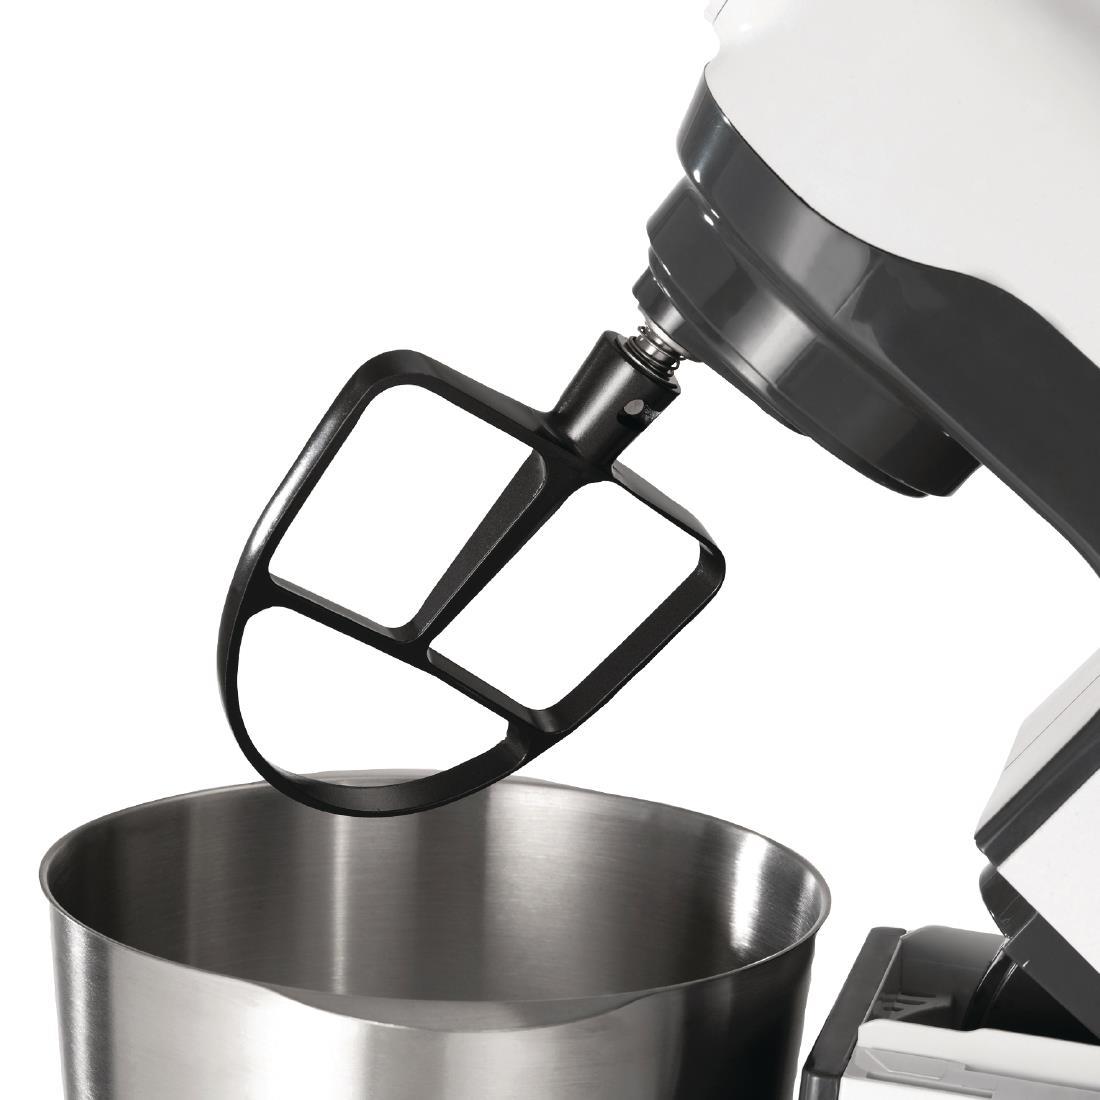 Morphy Richards Stand Mixer 400023 - FP906  - 5